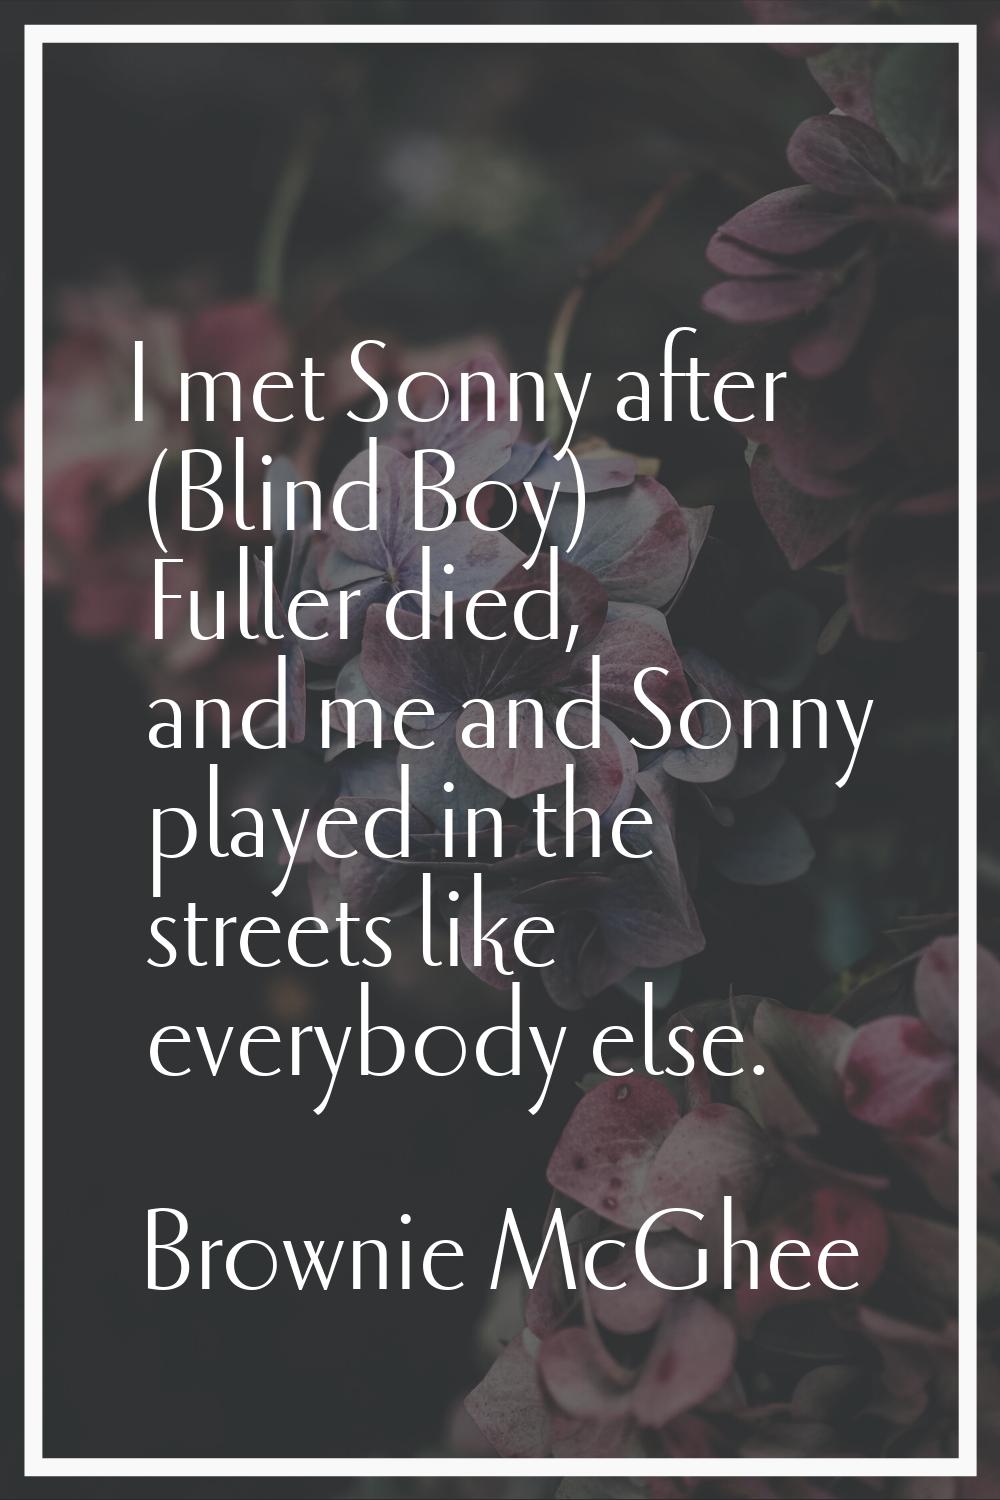 I met Sonny after (Blind Boy) Fuller died, and me and Sonny played in the streets like everybody el